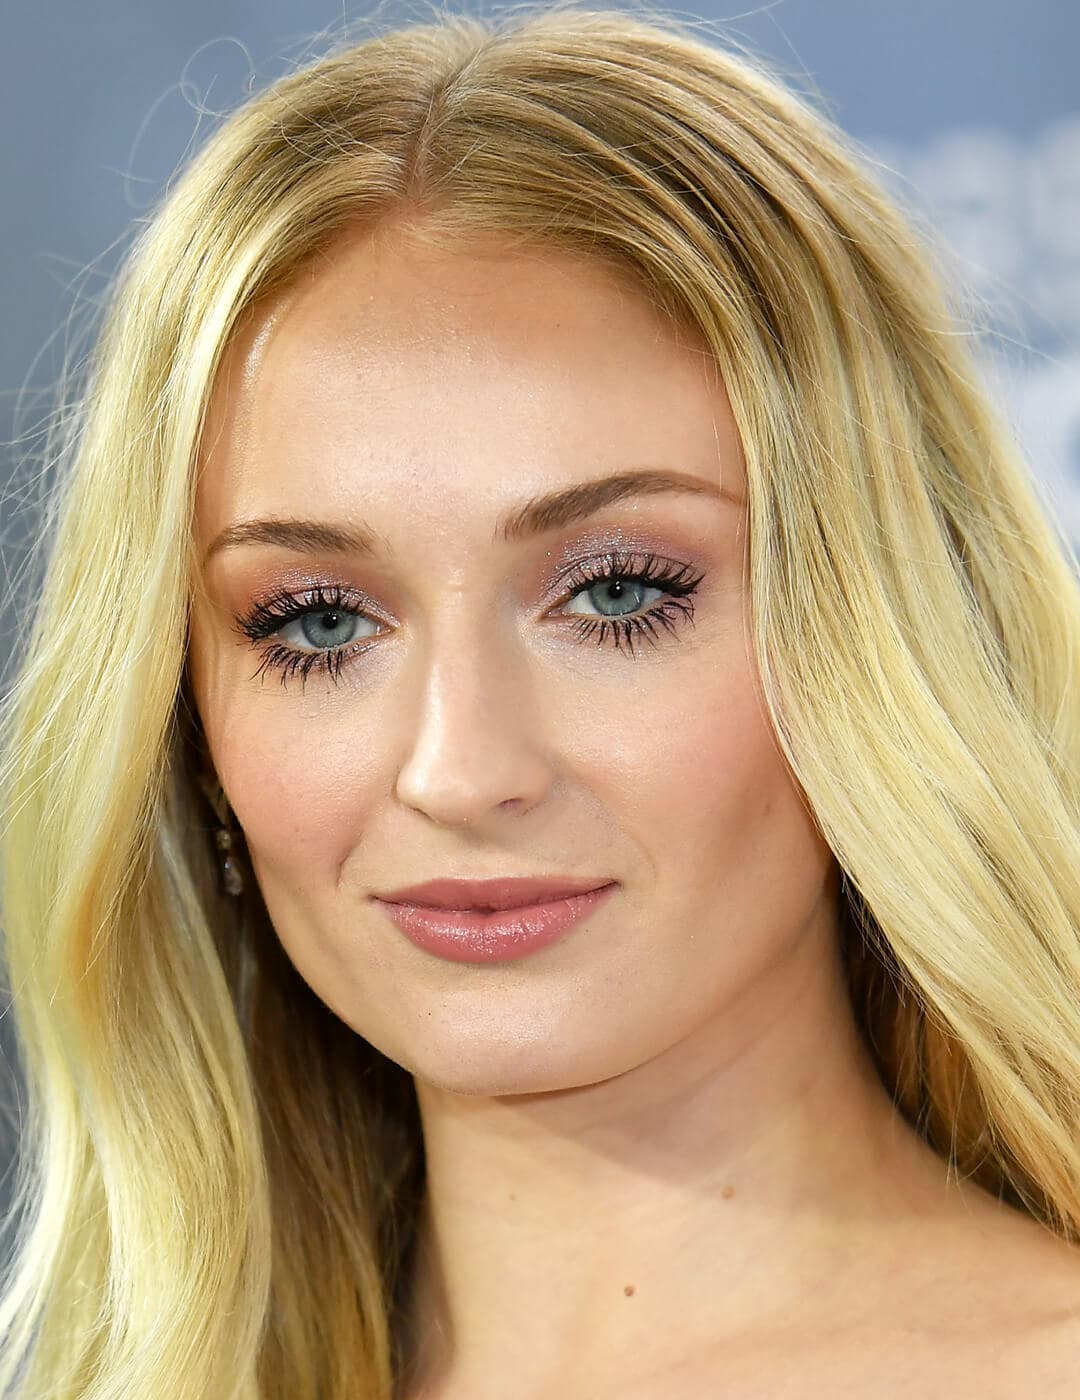 Sophie Turner rocking a shimmery mauve eyeshadow makeup look and bold fluttery lashes on the red carpet